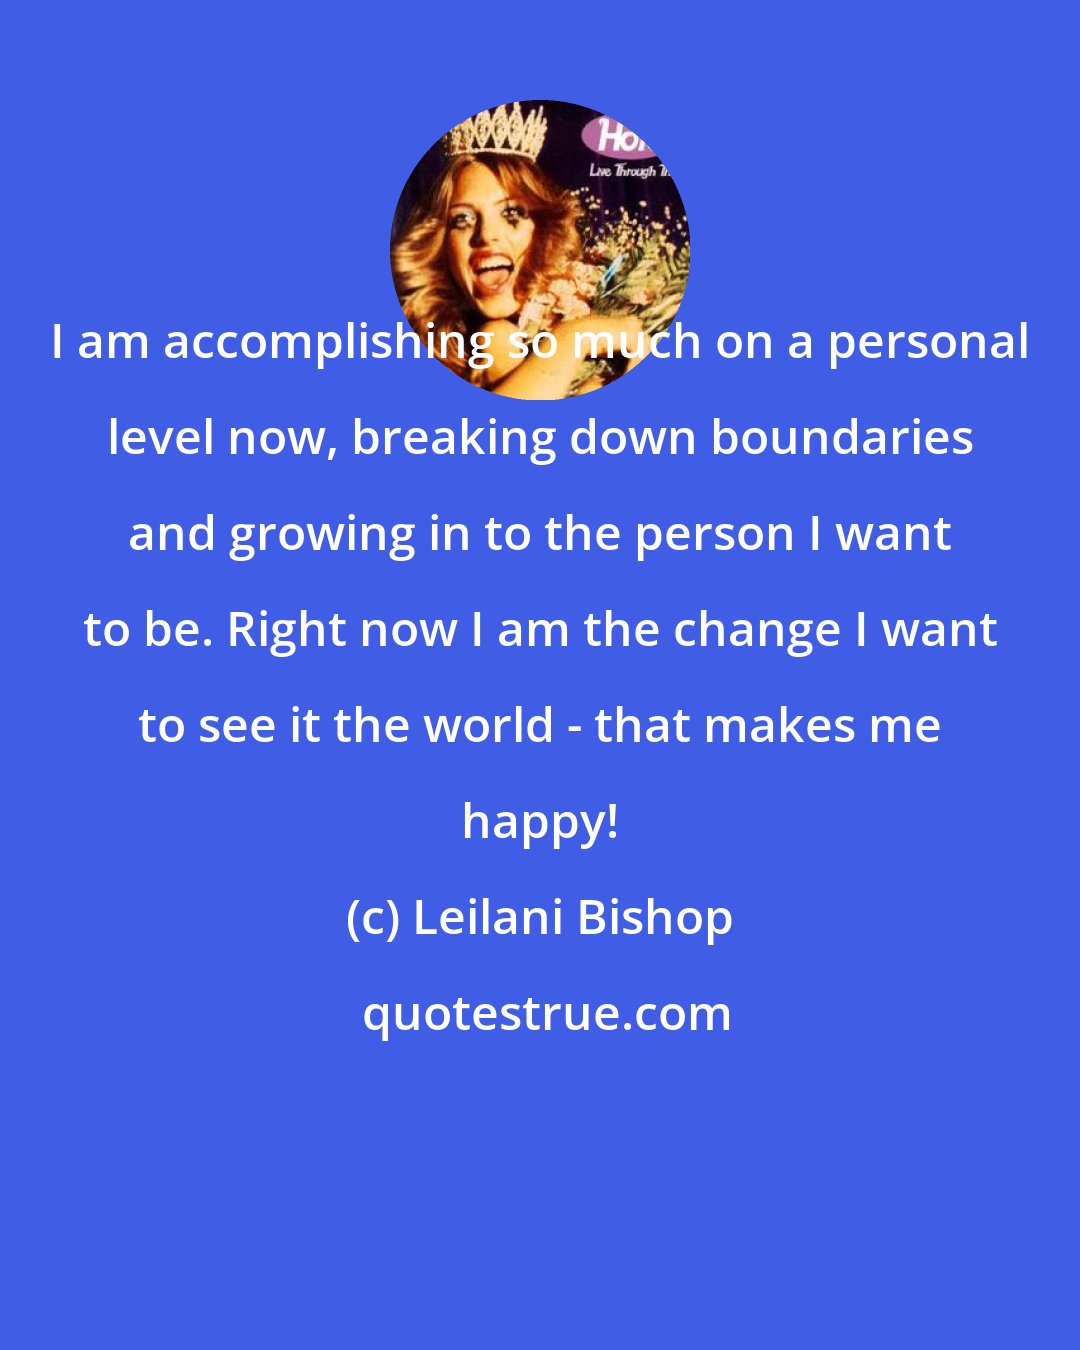 Leilani Bishop: I am accomplishing so much on a personal level now, breaking down boundaries and growing in to the person I want to be. Right now I am the change I want to see it the world - that makes me happy!